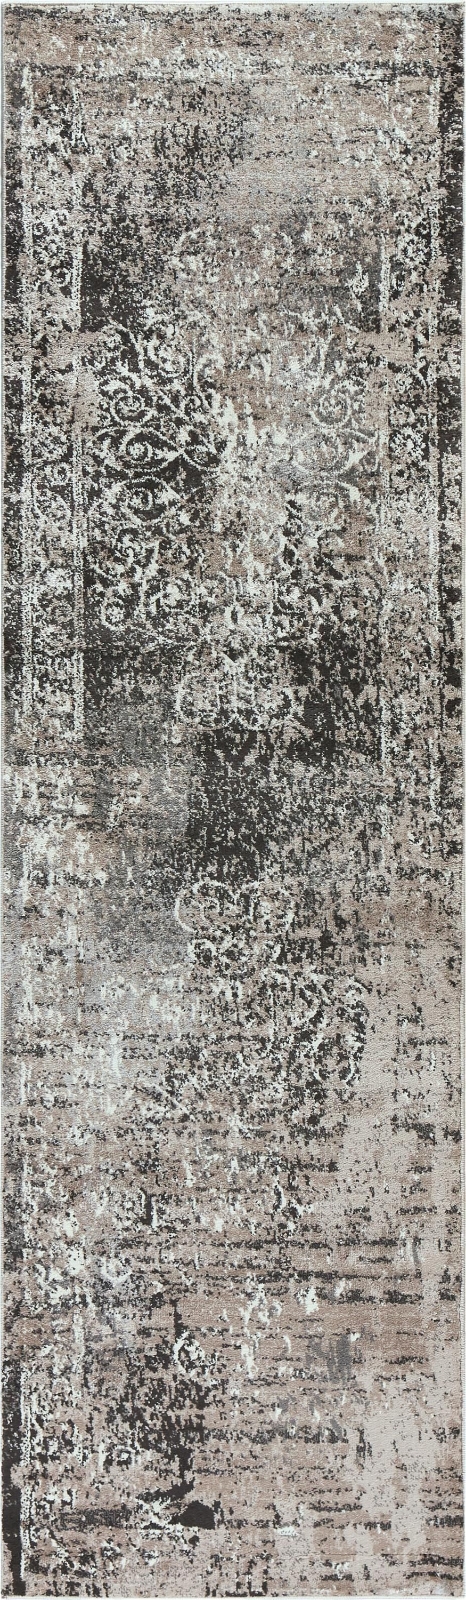 Picture of Panache Runner Rug